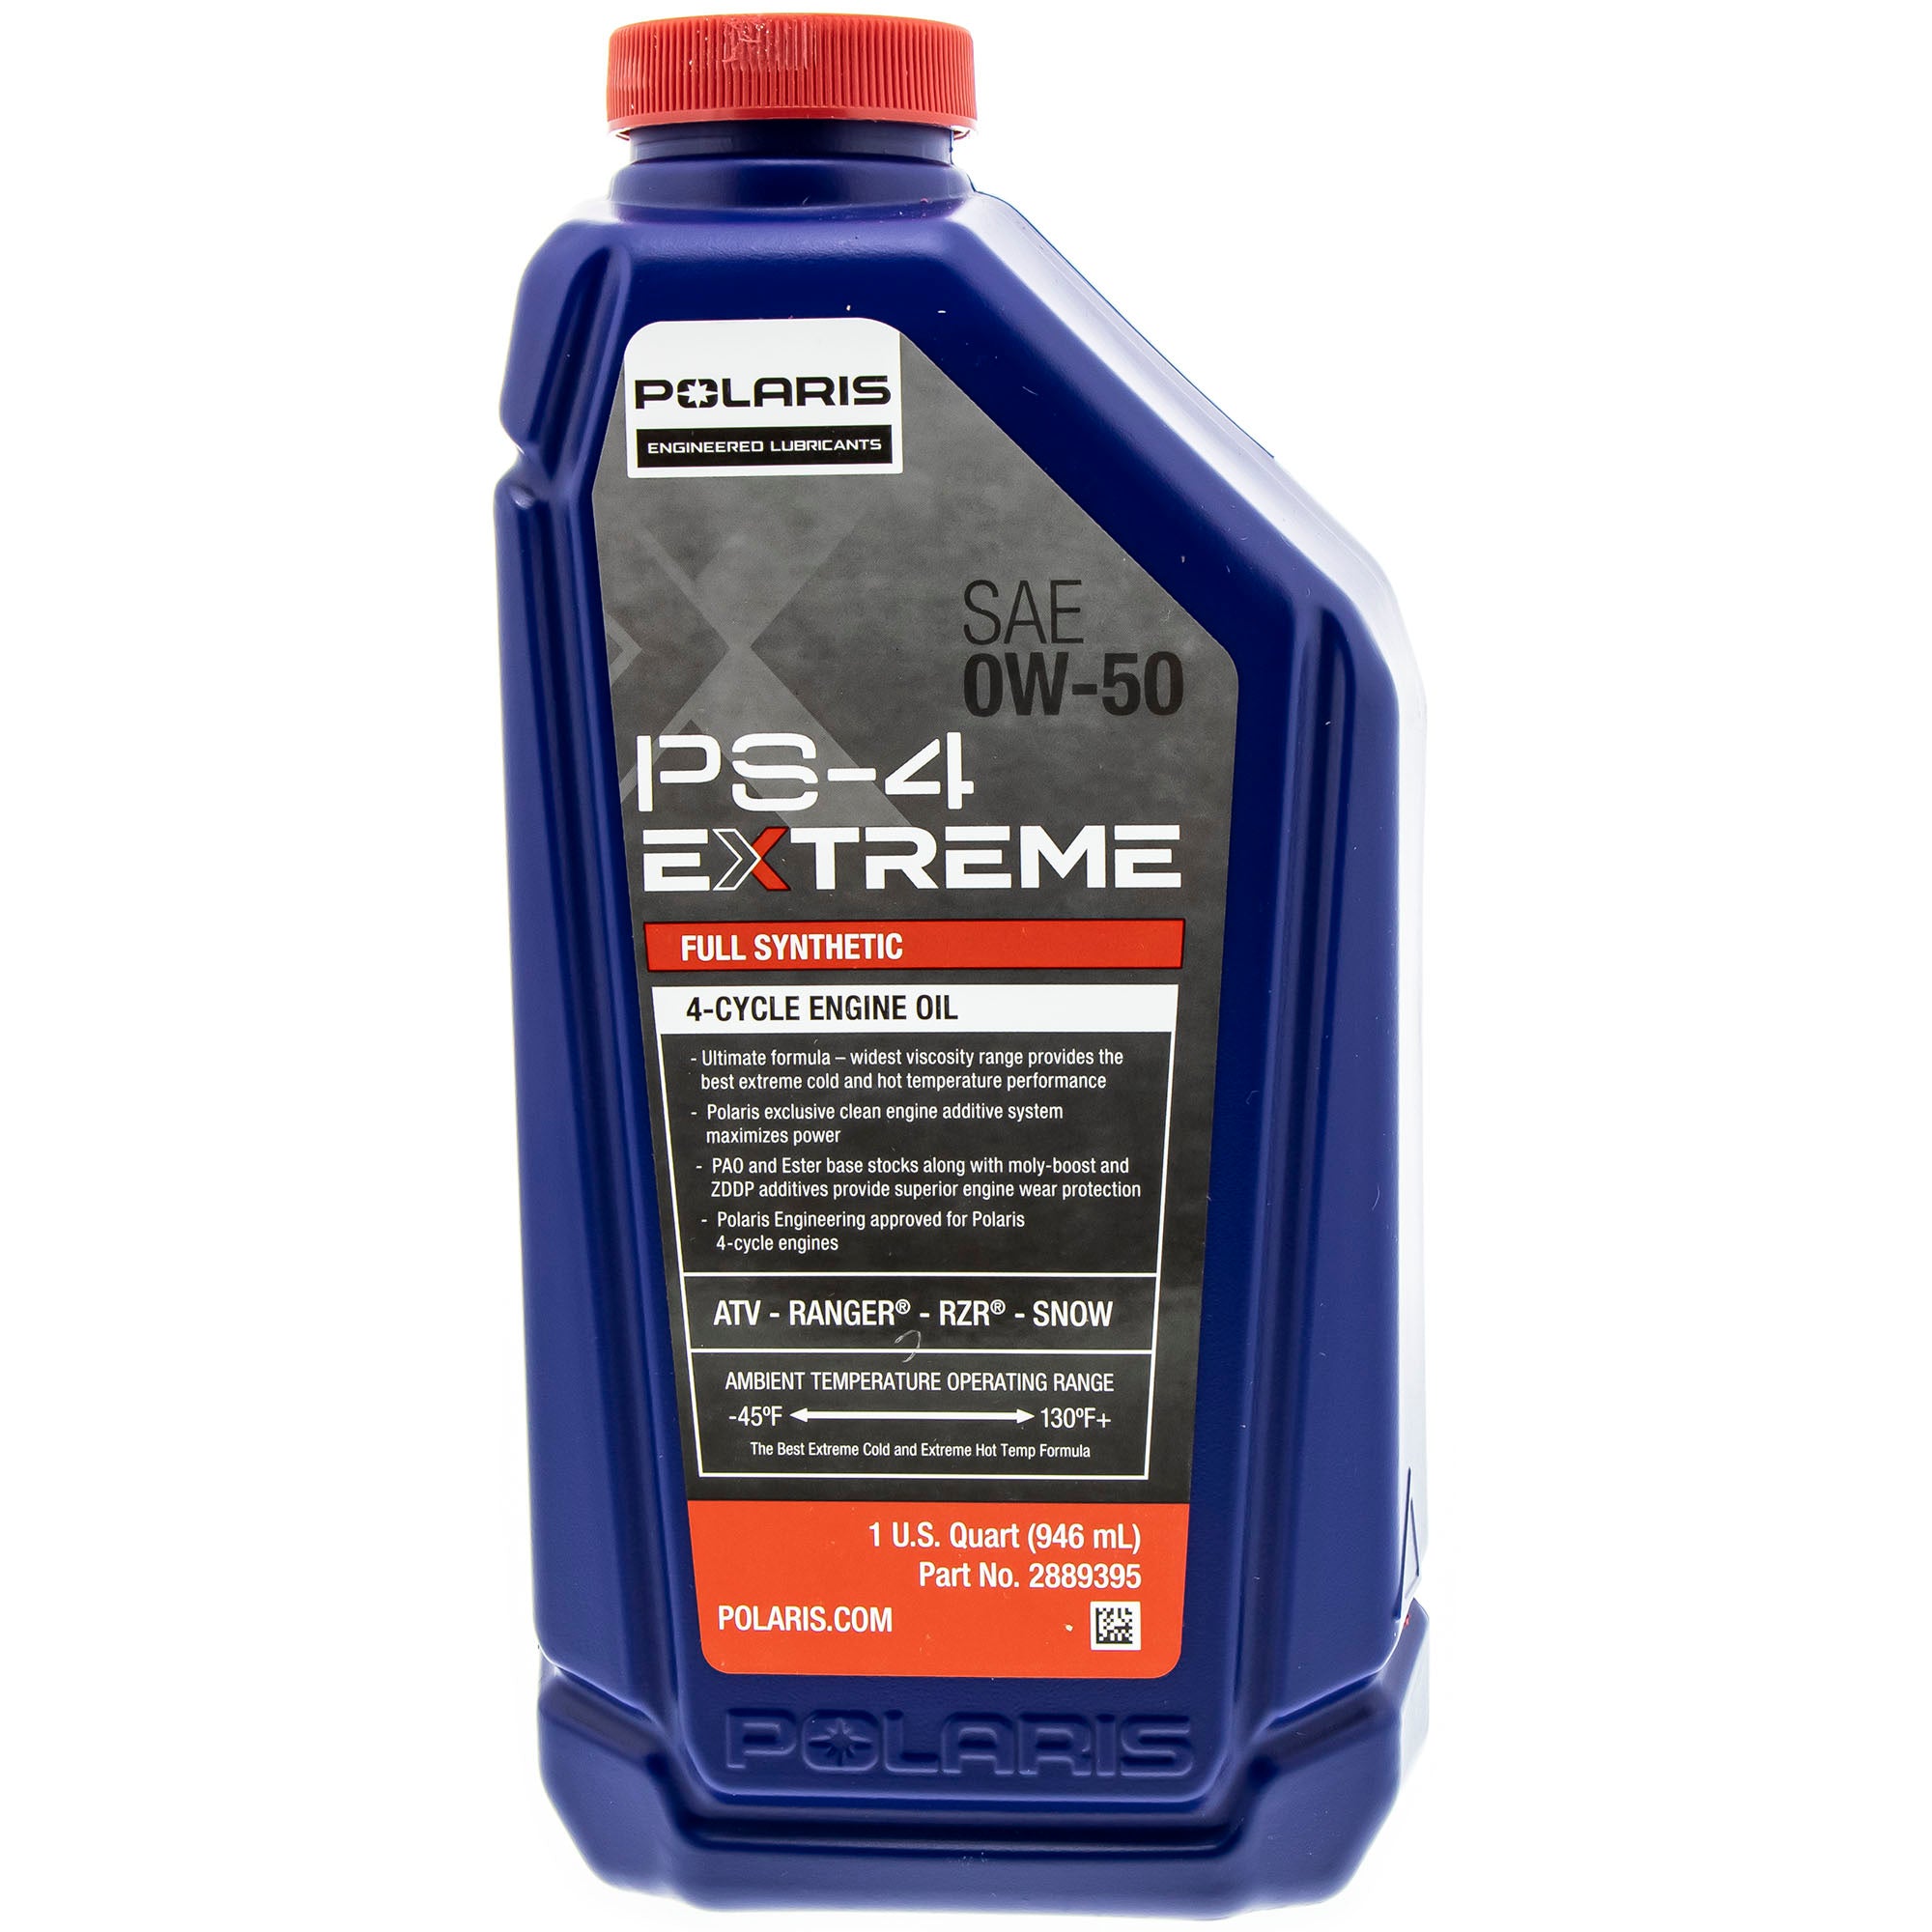 Polaris FKFSK20119 PS-4 Extreme Synthetic Full Service Oil Change Kit with Filter AGL